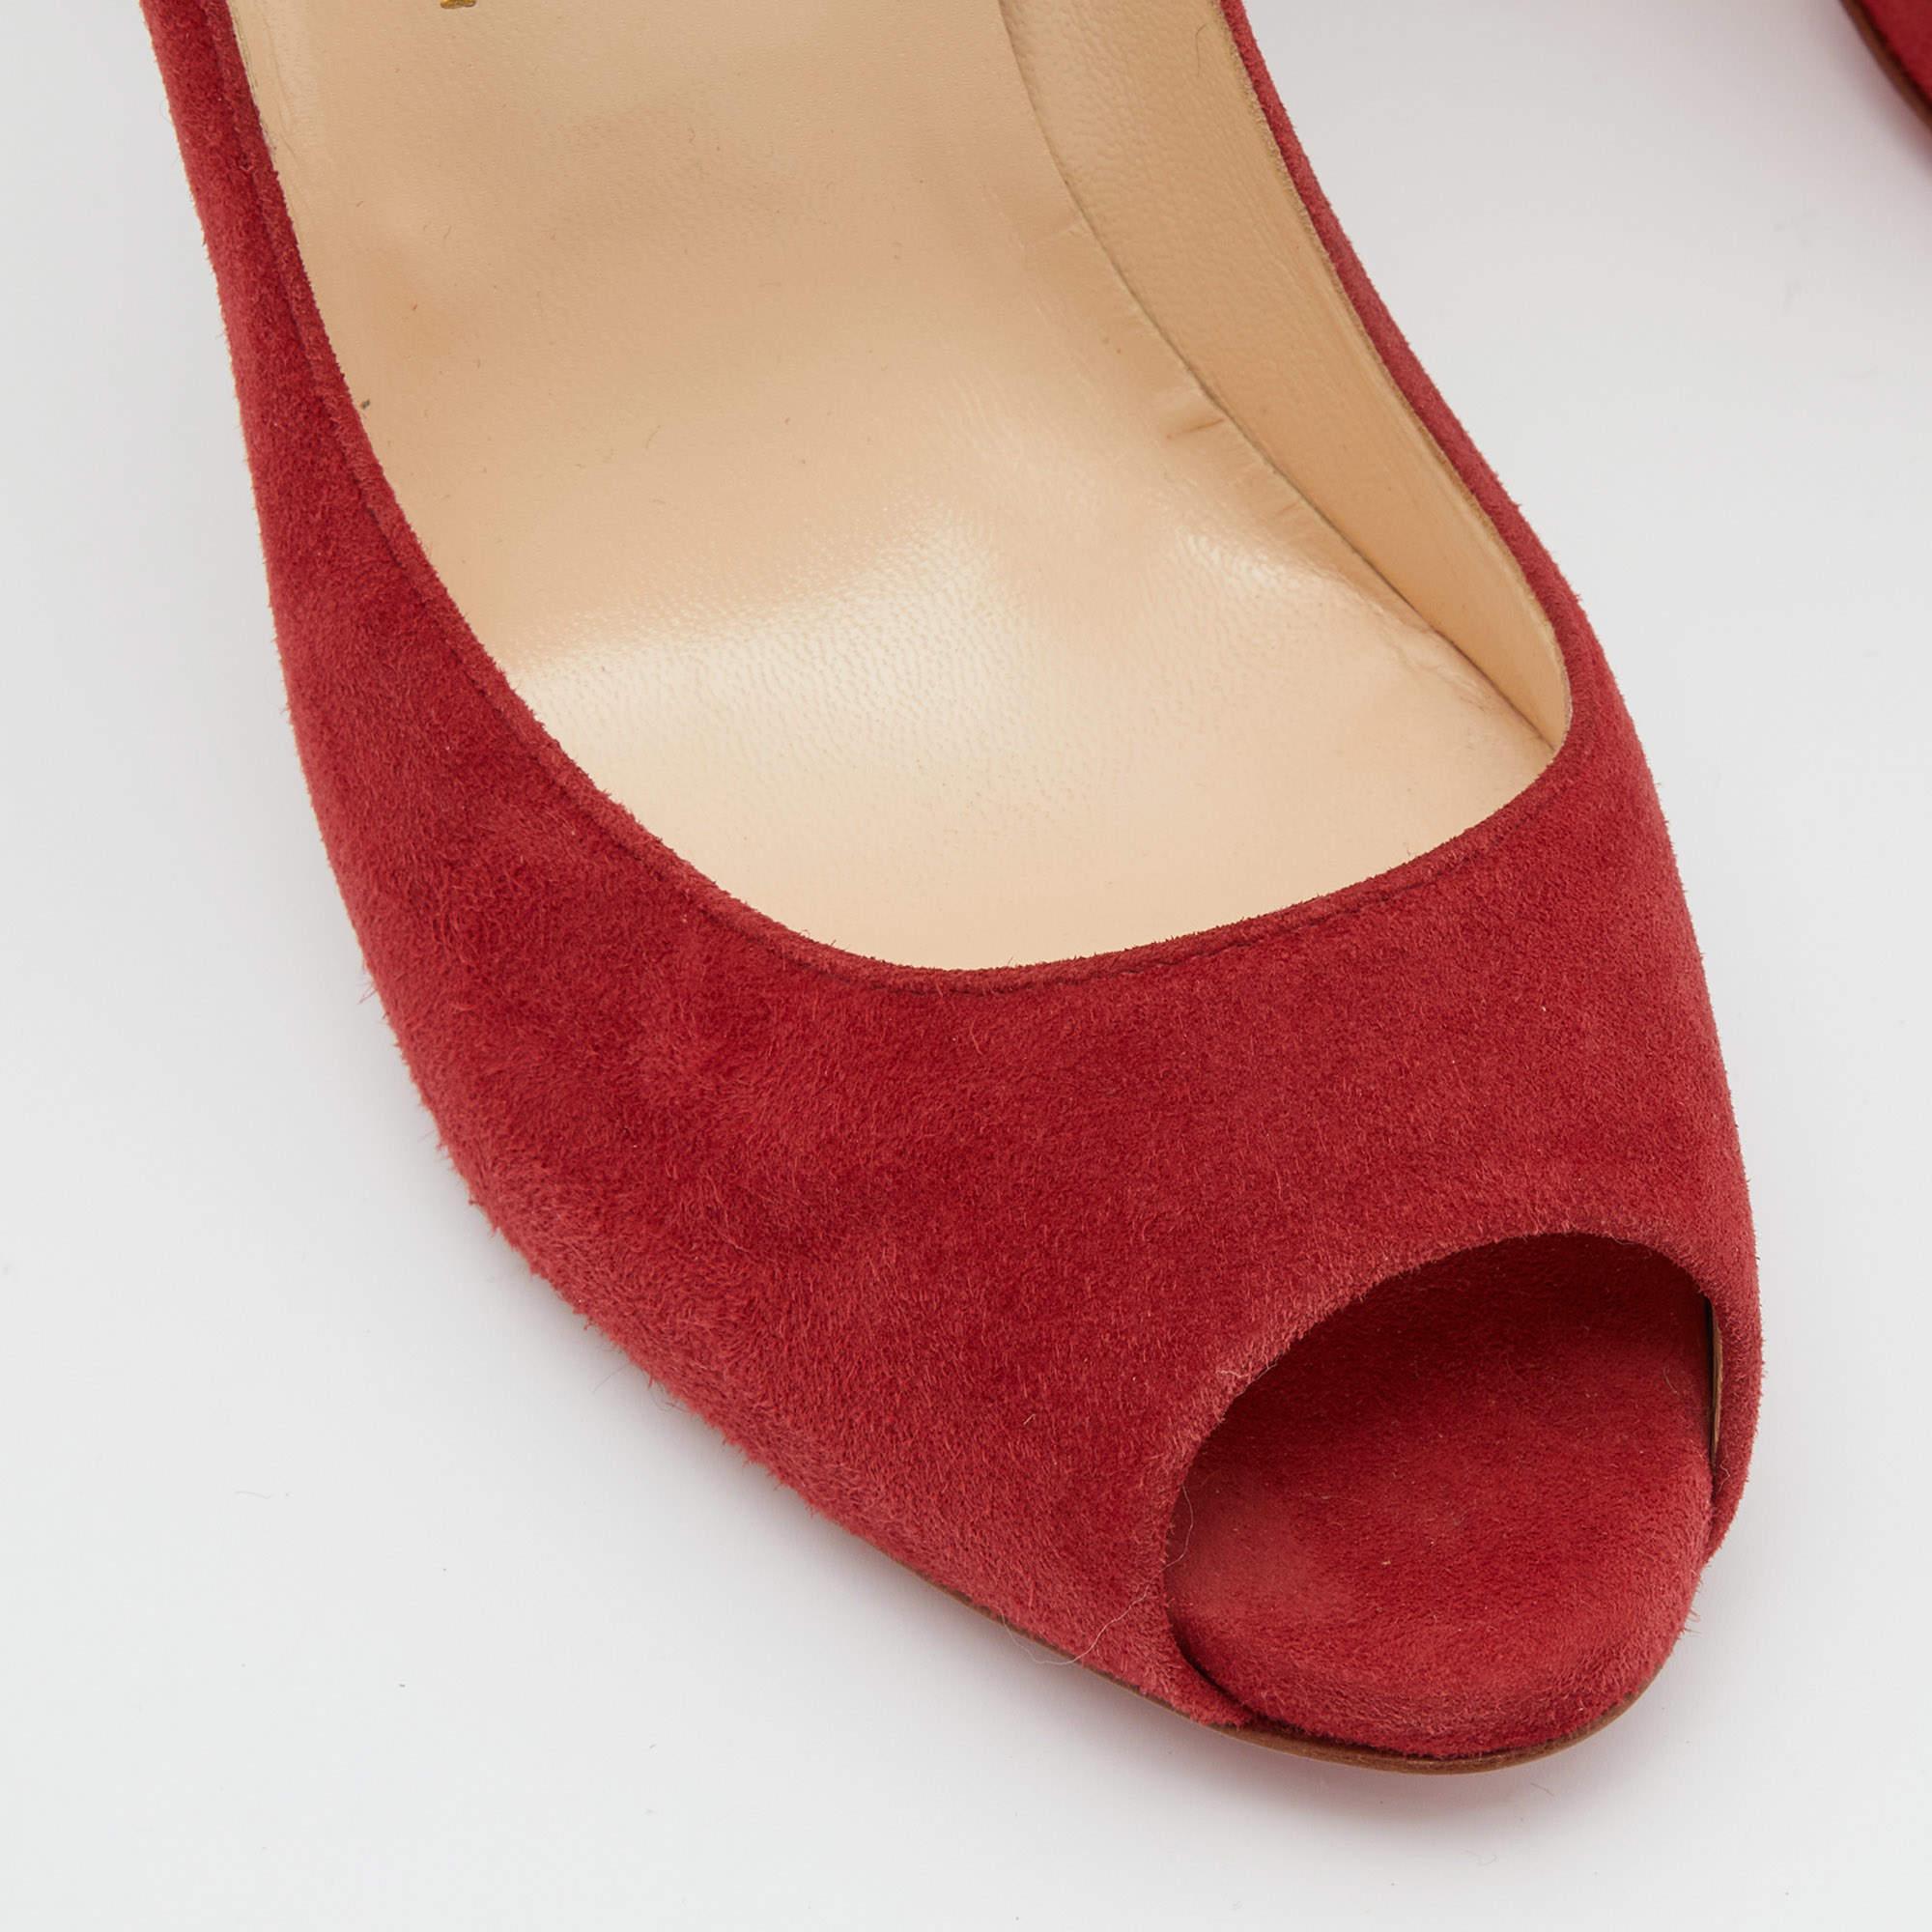 Christian Louboutin Red Suede Hyper Prive Peep Toe Platform Pumps Size 38.5 For Sale 3